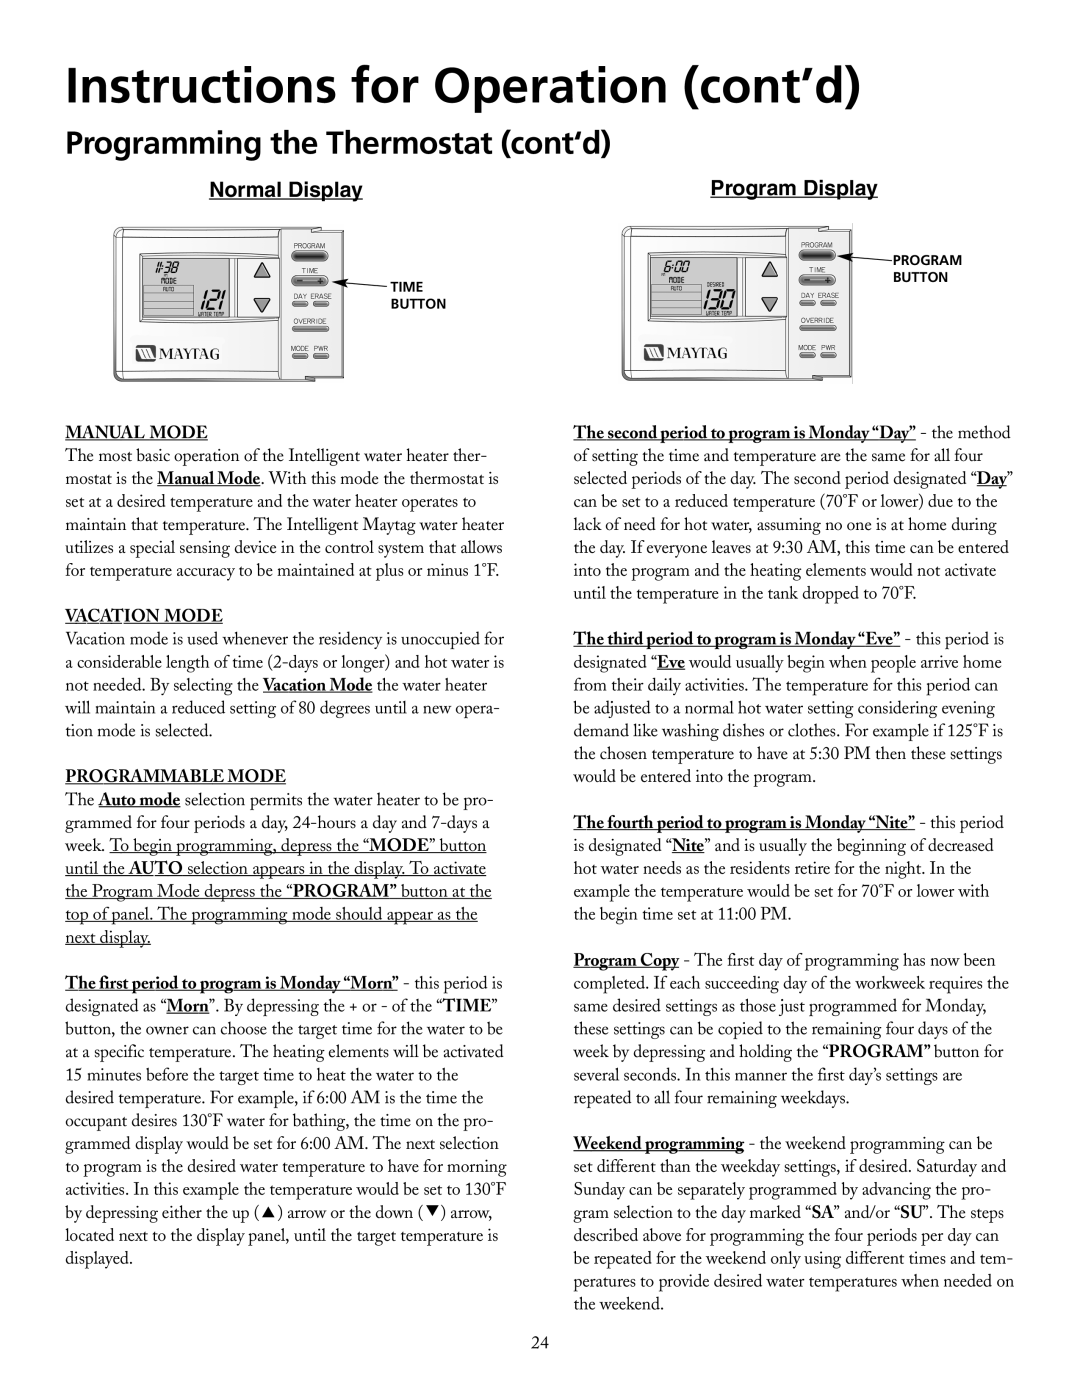 Maytag HRE21250PC Instructions for Operation cont’d, Programming the Thermostat cont‘d, Normal Display, Program Display 